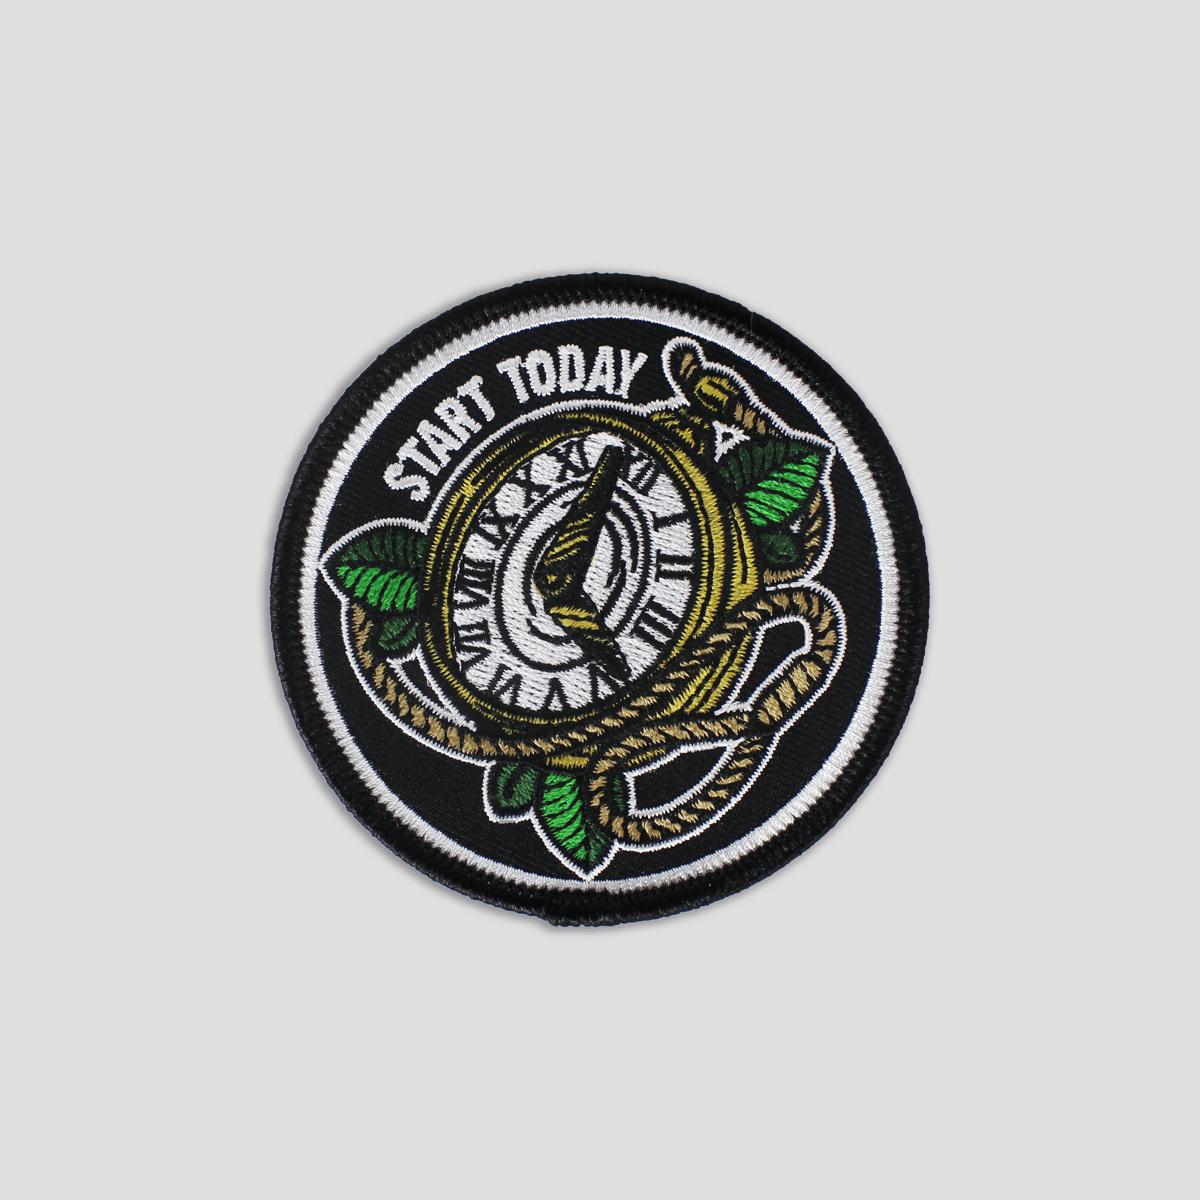 START TODAY PATCH | Longlive The Swarm®